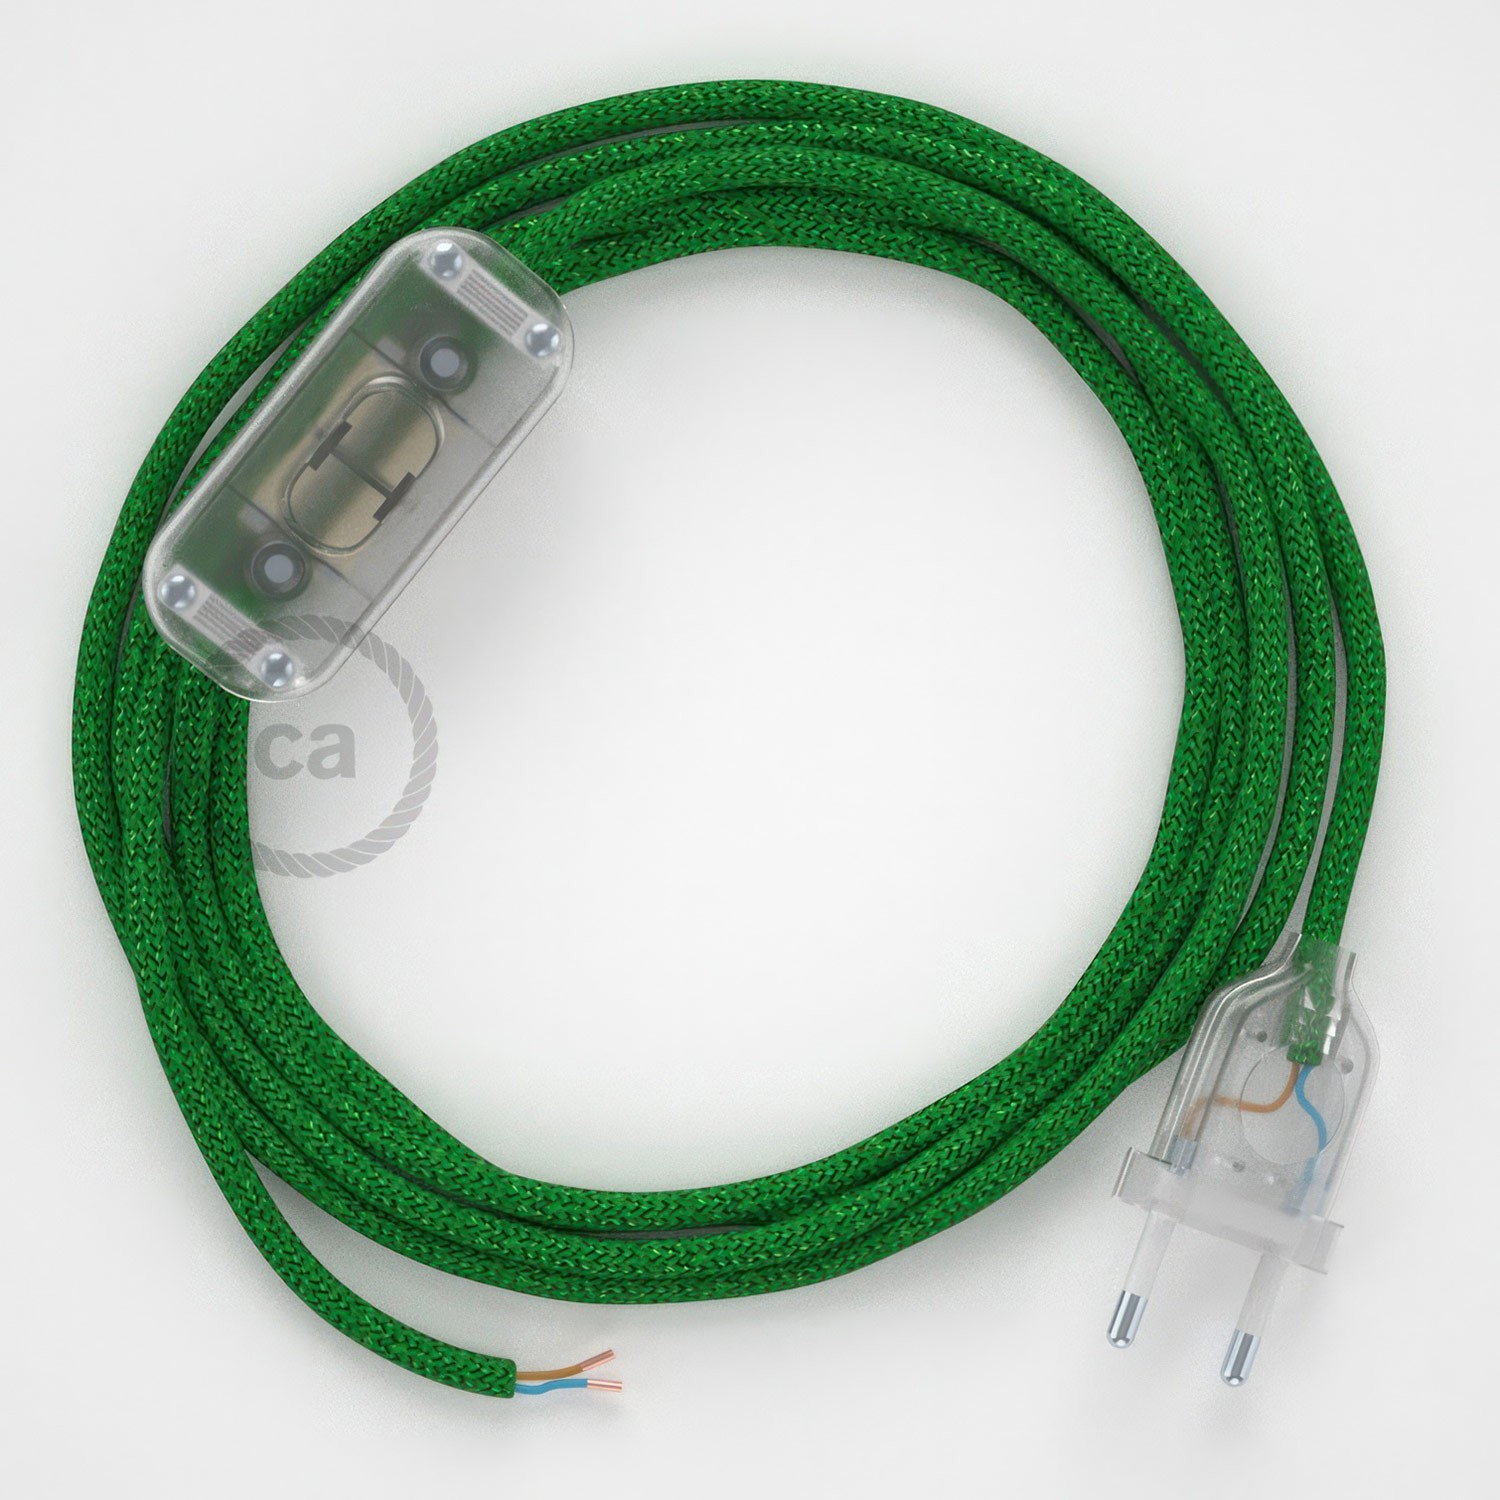 Lamp wiring, RL06 Sparkly Green Rayon 1,80 m. Choose the colour of the switch and plug.